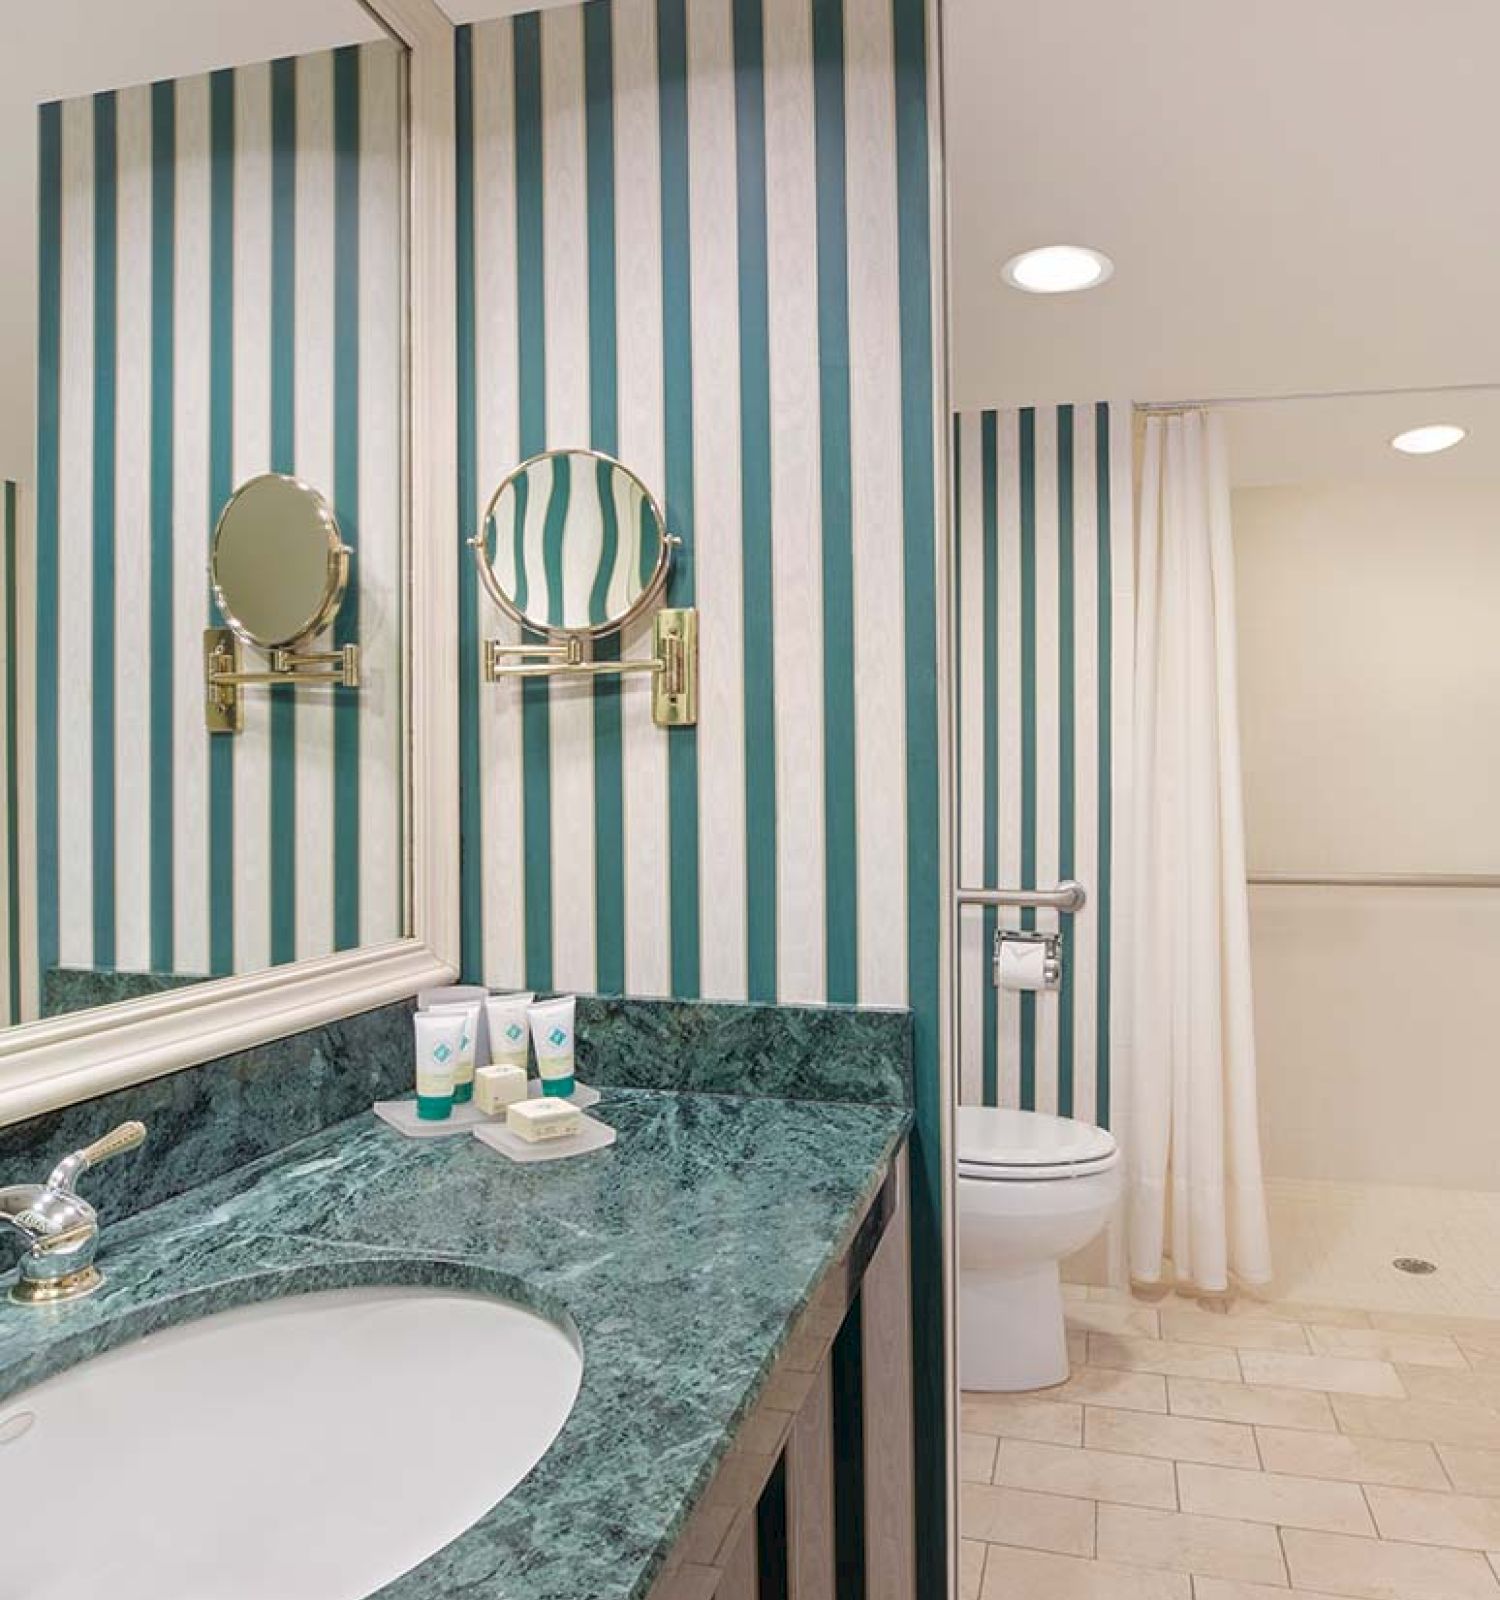 A bathroom with striped walls, sink, mirror, toiletries, and a glimpse of the shower curtain.